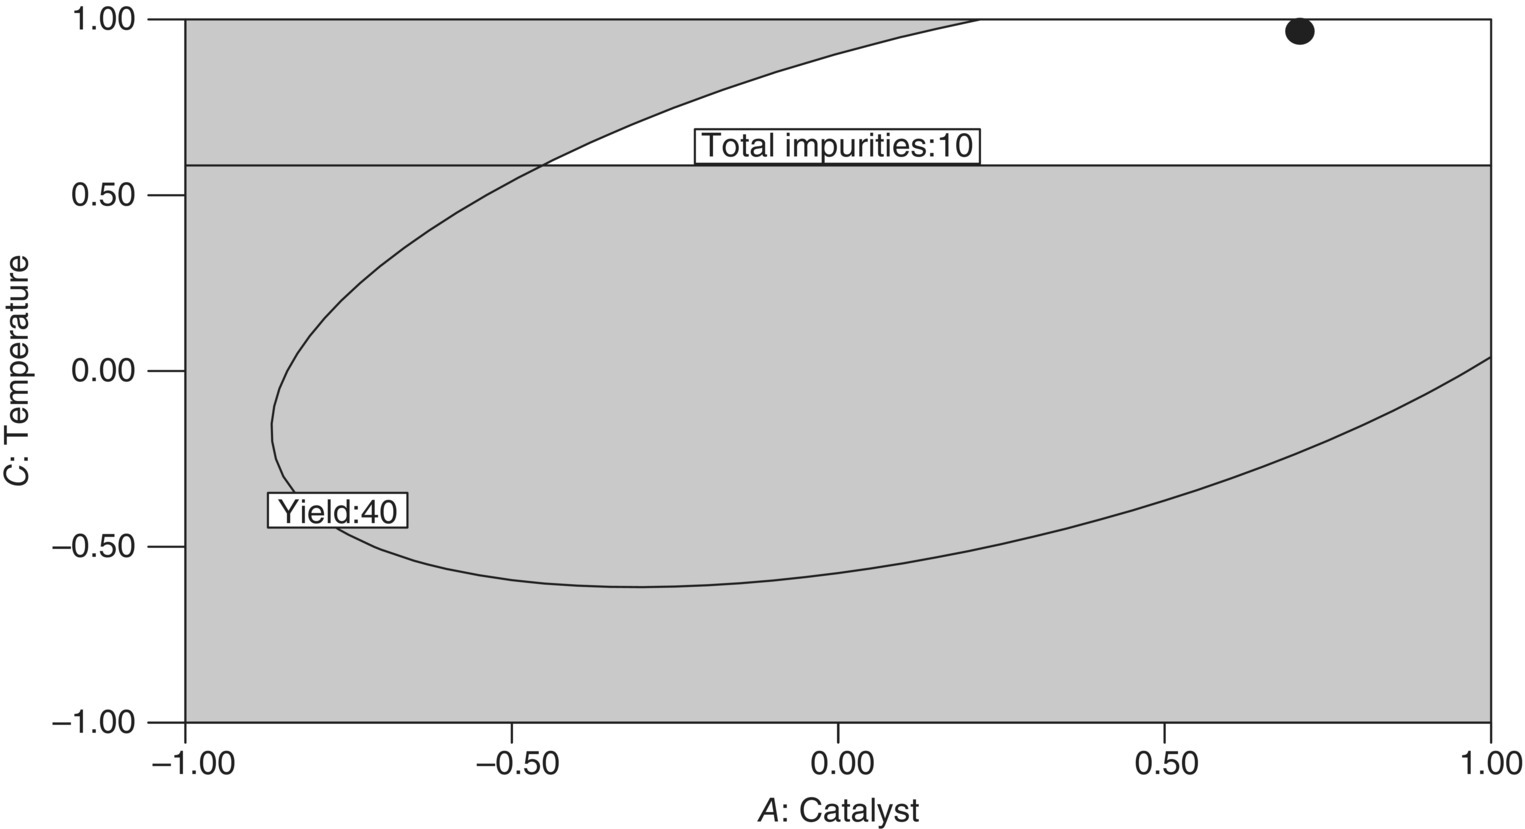 Graph illustrating overlay plot of catalyst–temperature combinations displaying shaded regions labeled yield:40 and unshaded area for total impurities:10. A dot at the upper right depicts candidate optimal setting.